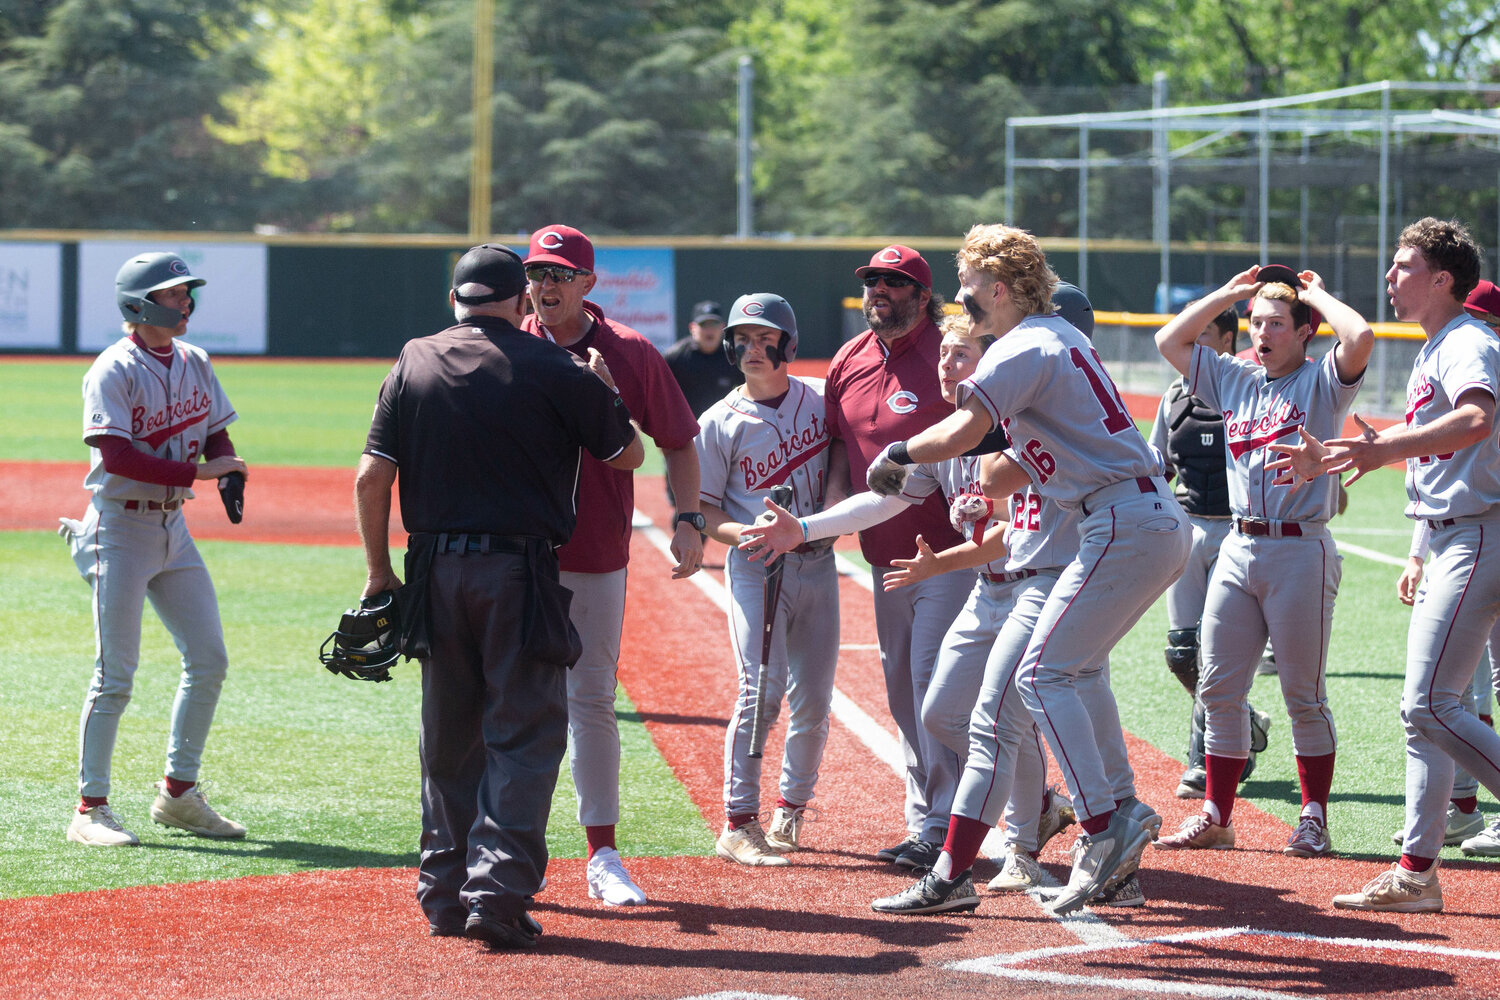 The W.F. West baseball team reacts after finding out the home plate ump ruled Deacon Meller out after stealing home in a 5-4 win over Selah in the 2A state third-place game at Joe Martin Stadium in Bellingham May 27. The umps overturned the call moments later.